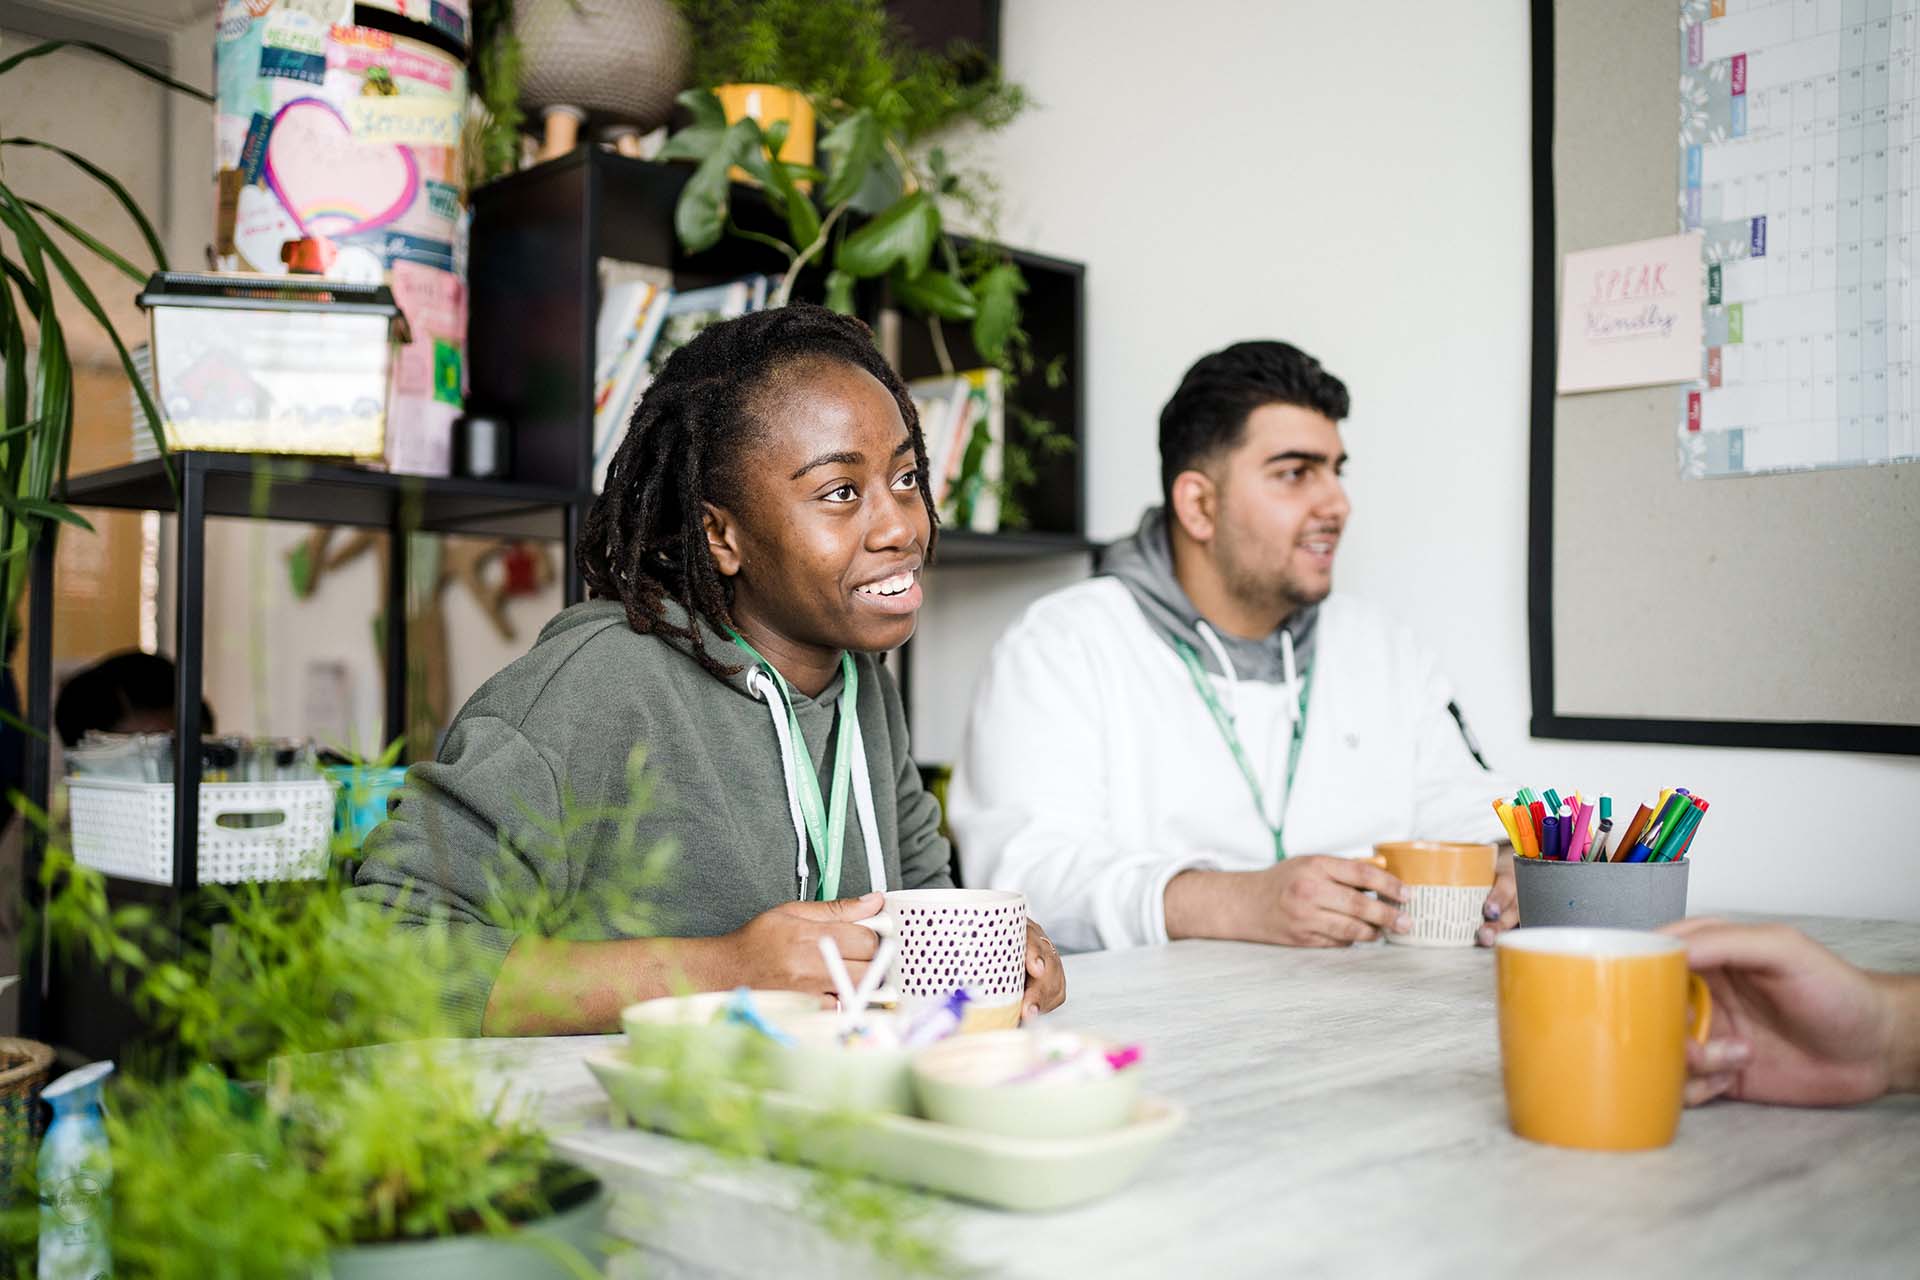 Two students wearing lanyards and smiling, sat having a cup of tea at a table in a room with plants, books and pens.